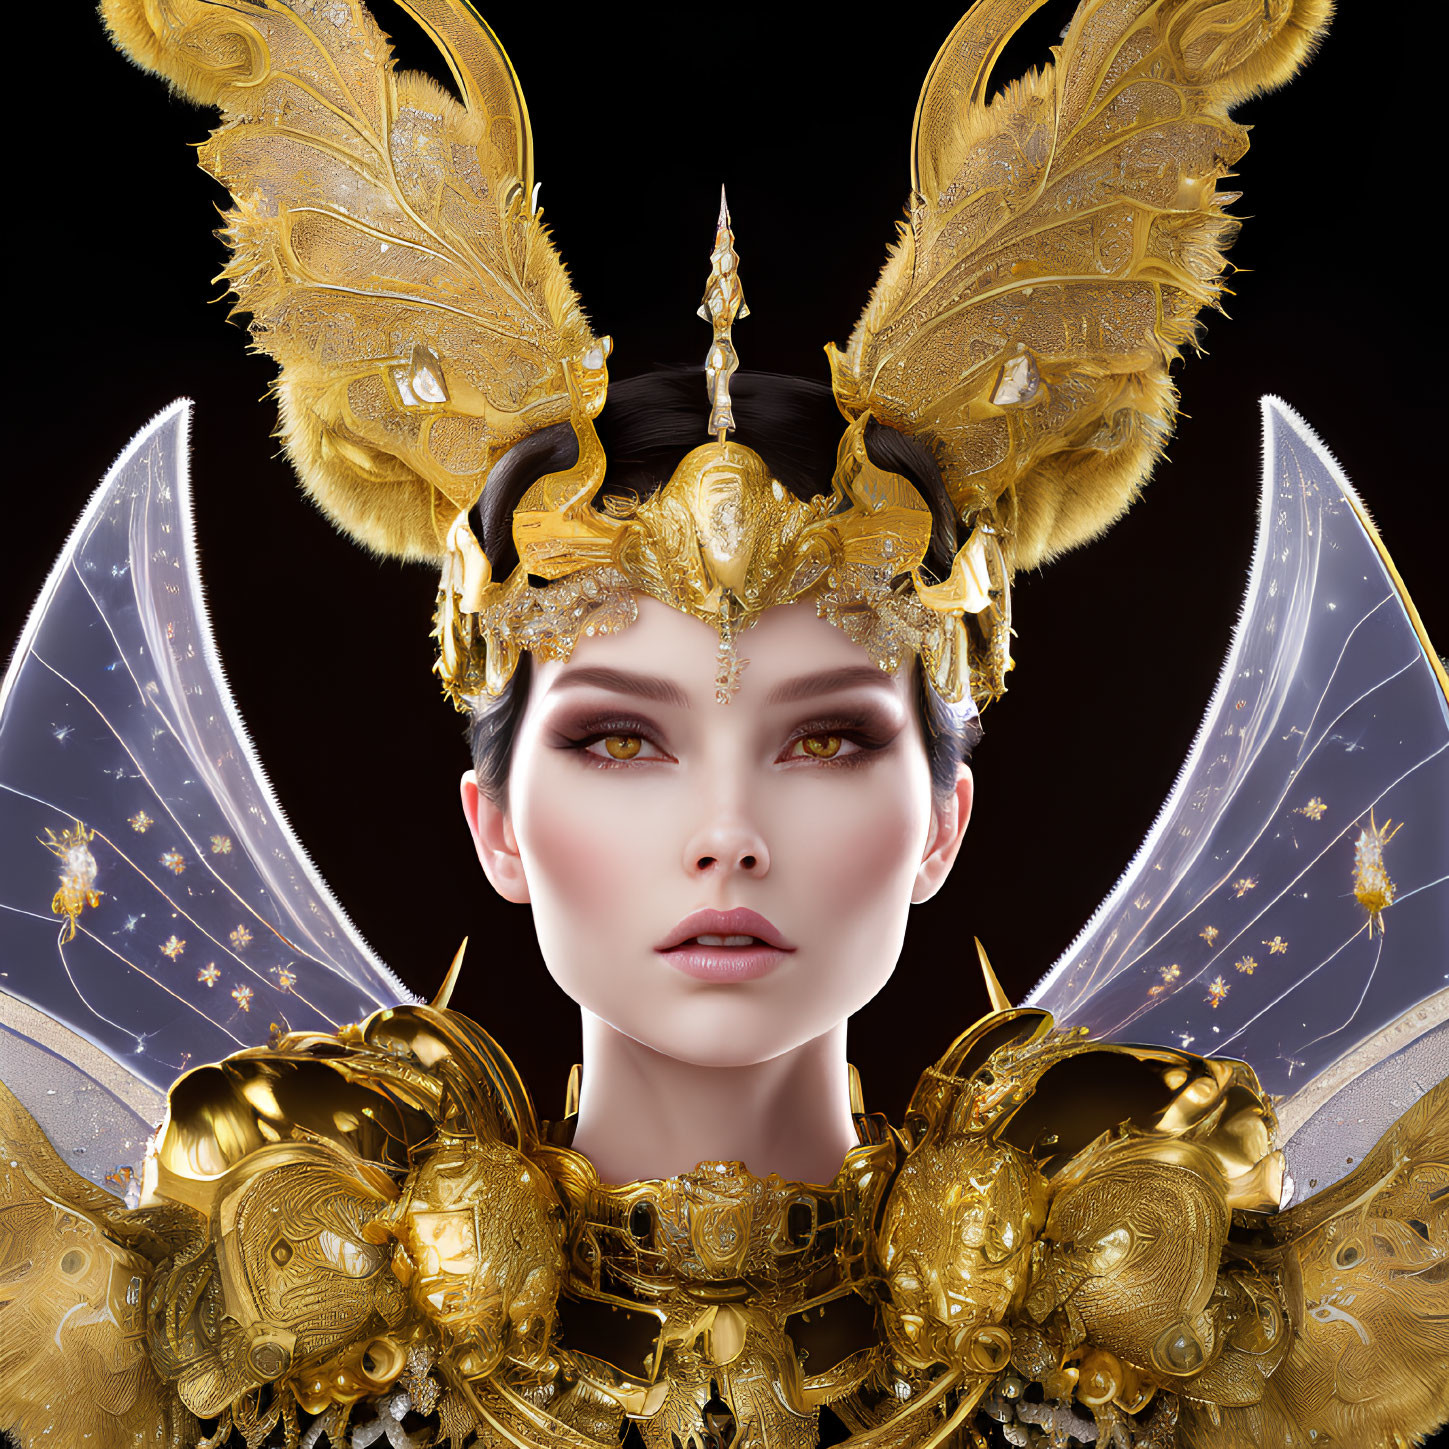 Fantastical portrait of a woman in gold armor with celestial motifs